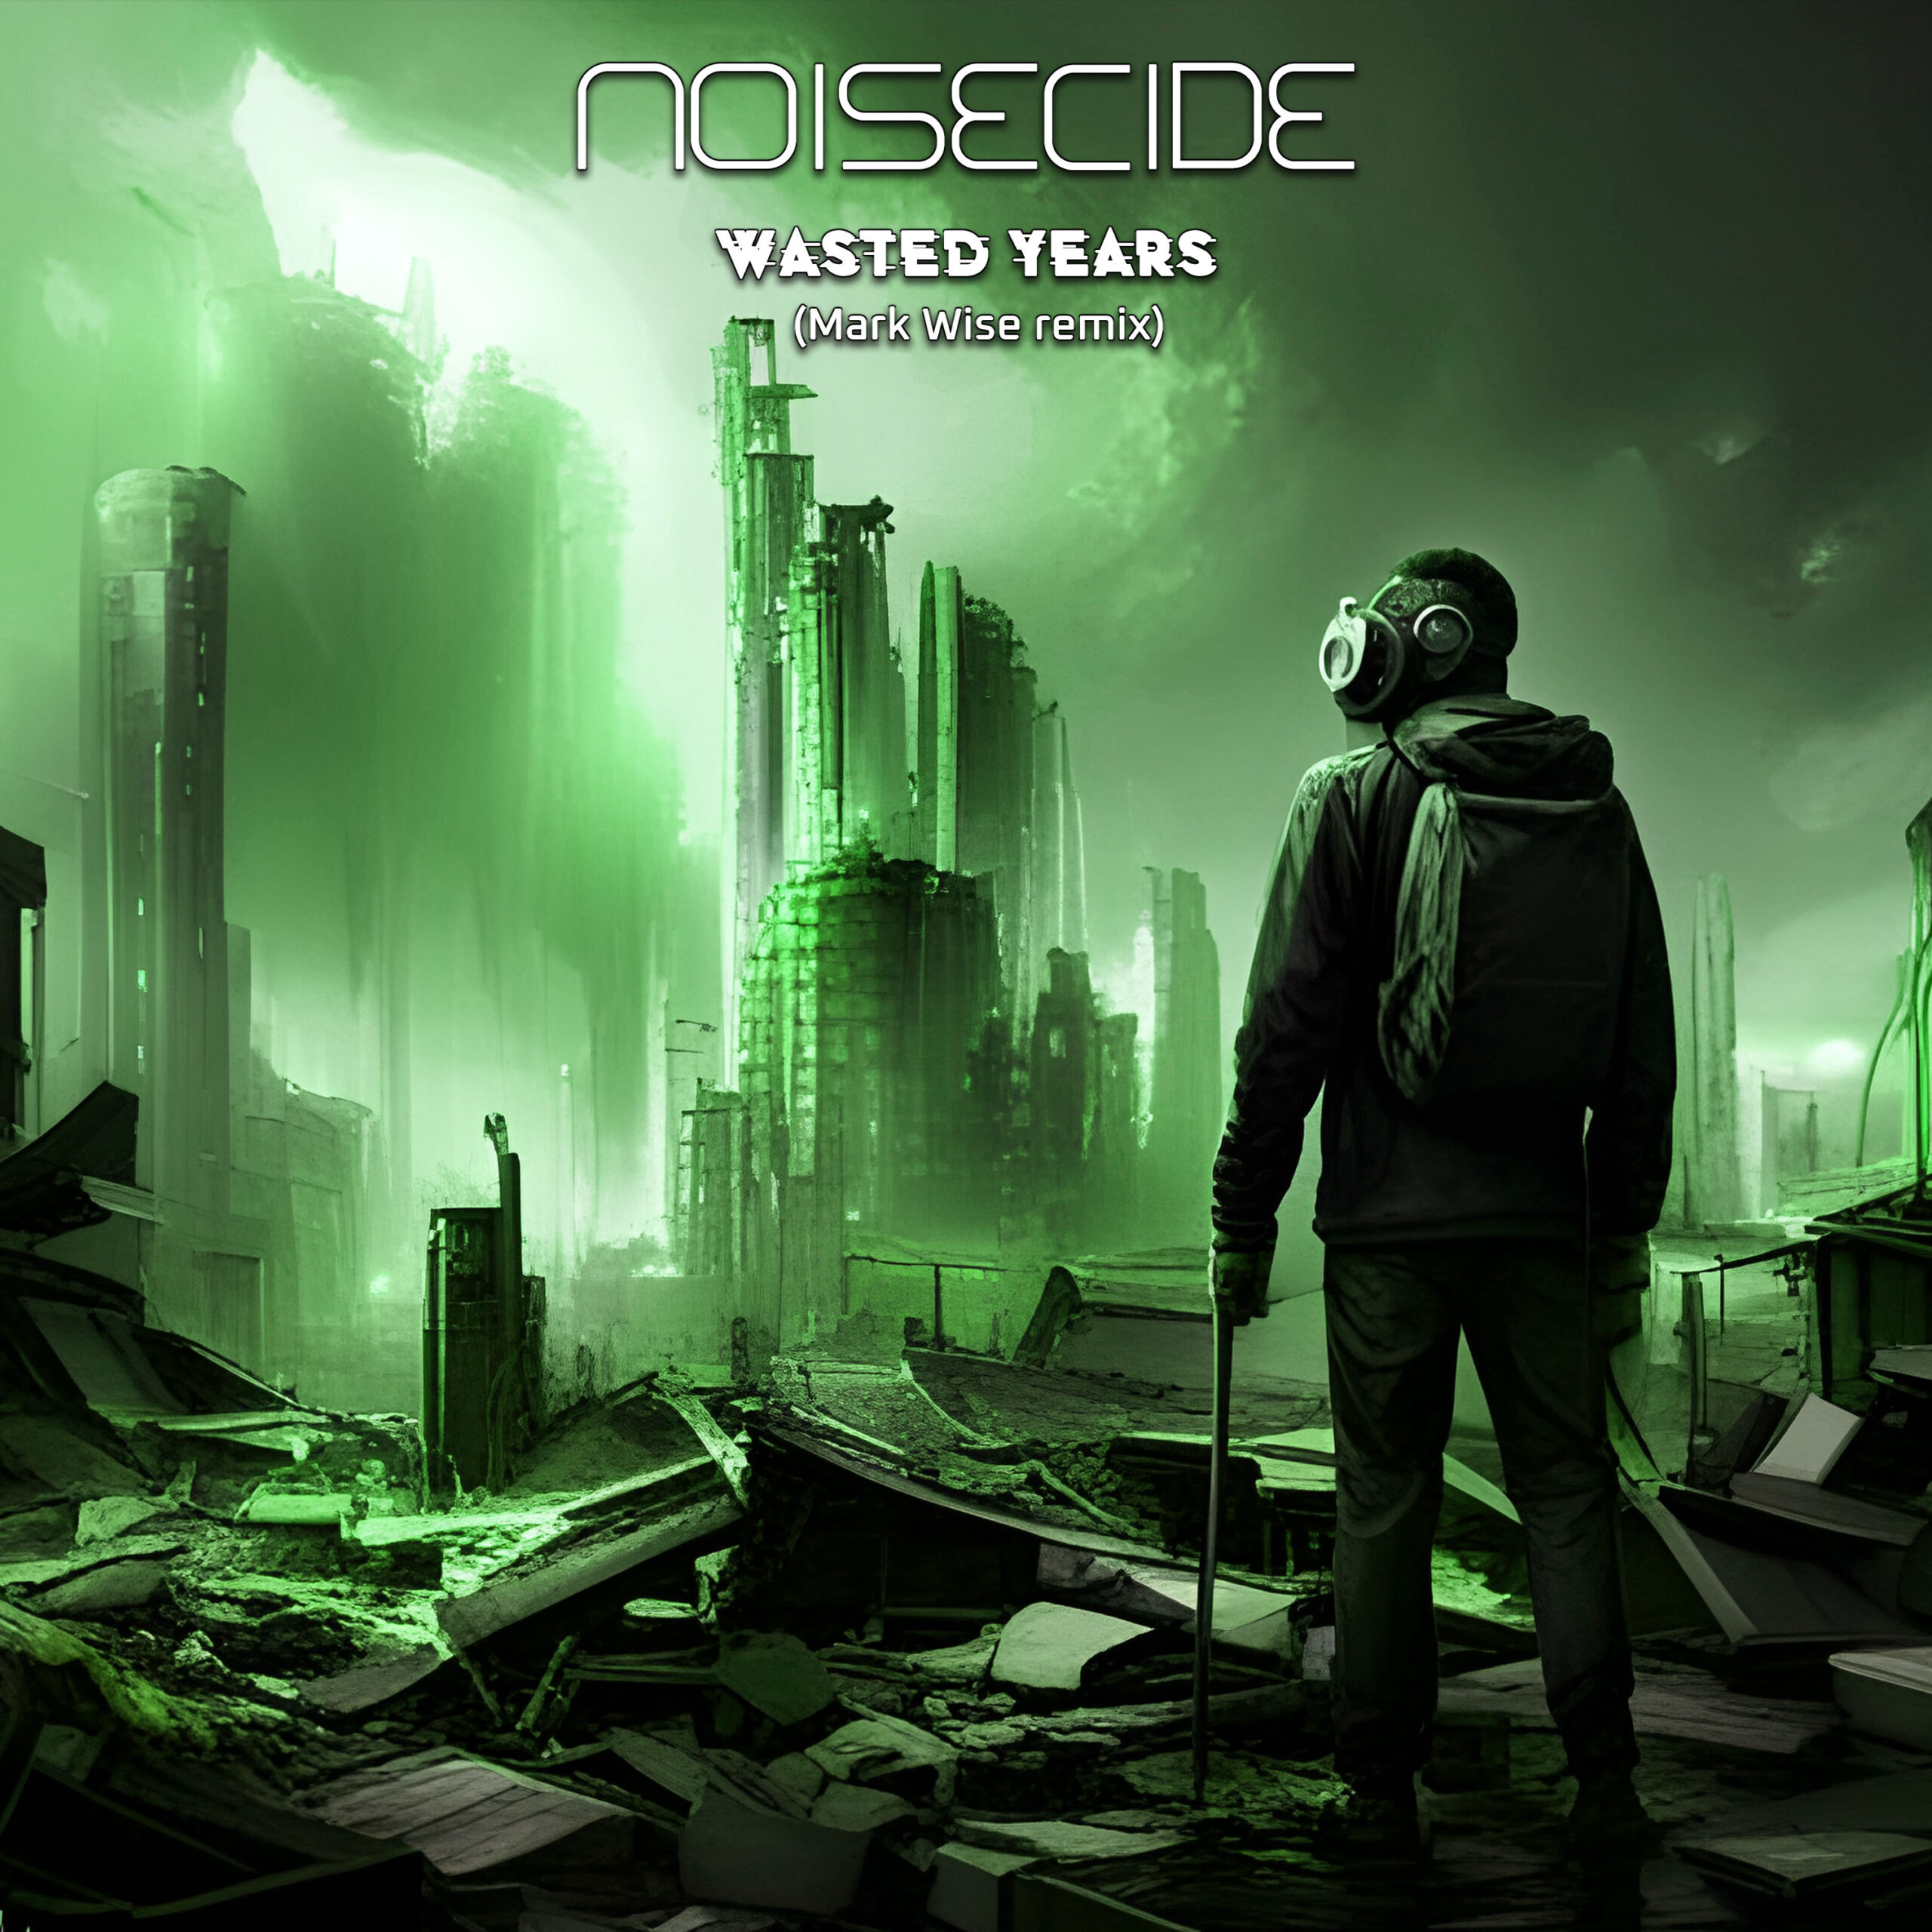 Mark Wise remixes “Wasted Years” by the industrial metal band Noisecide